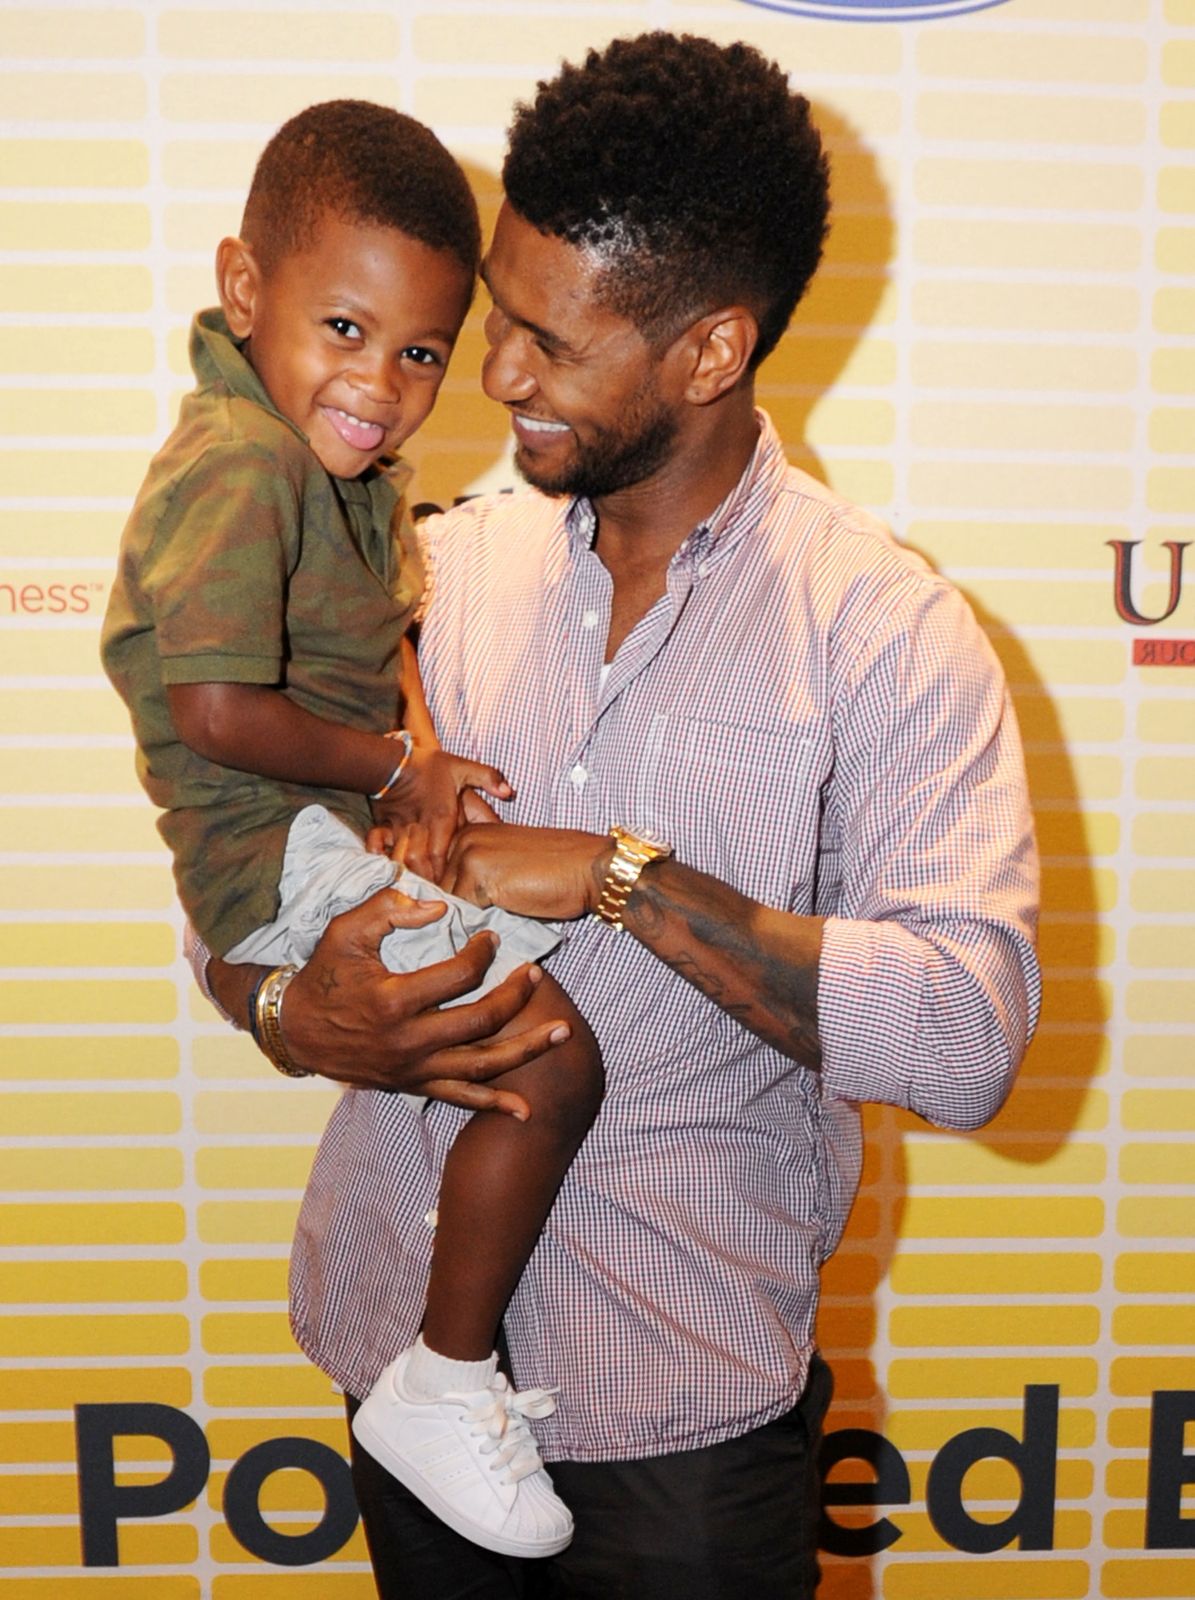 Usher and his son Usher Raymond V at Usher's New Look Foundation - World Leadership Conference & Awards on July 21, 2011, in Atlanta, Georgia | Photo: Chris McKay/Getty Images